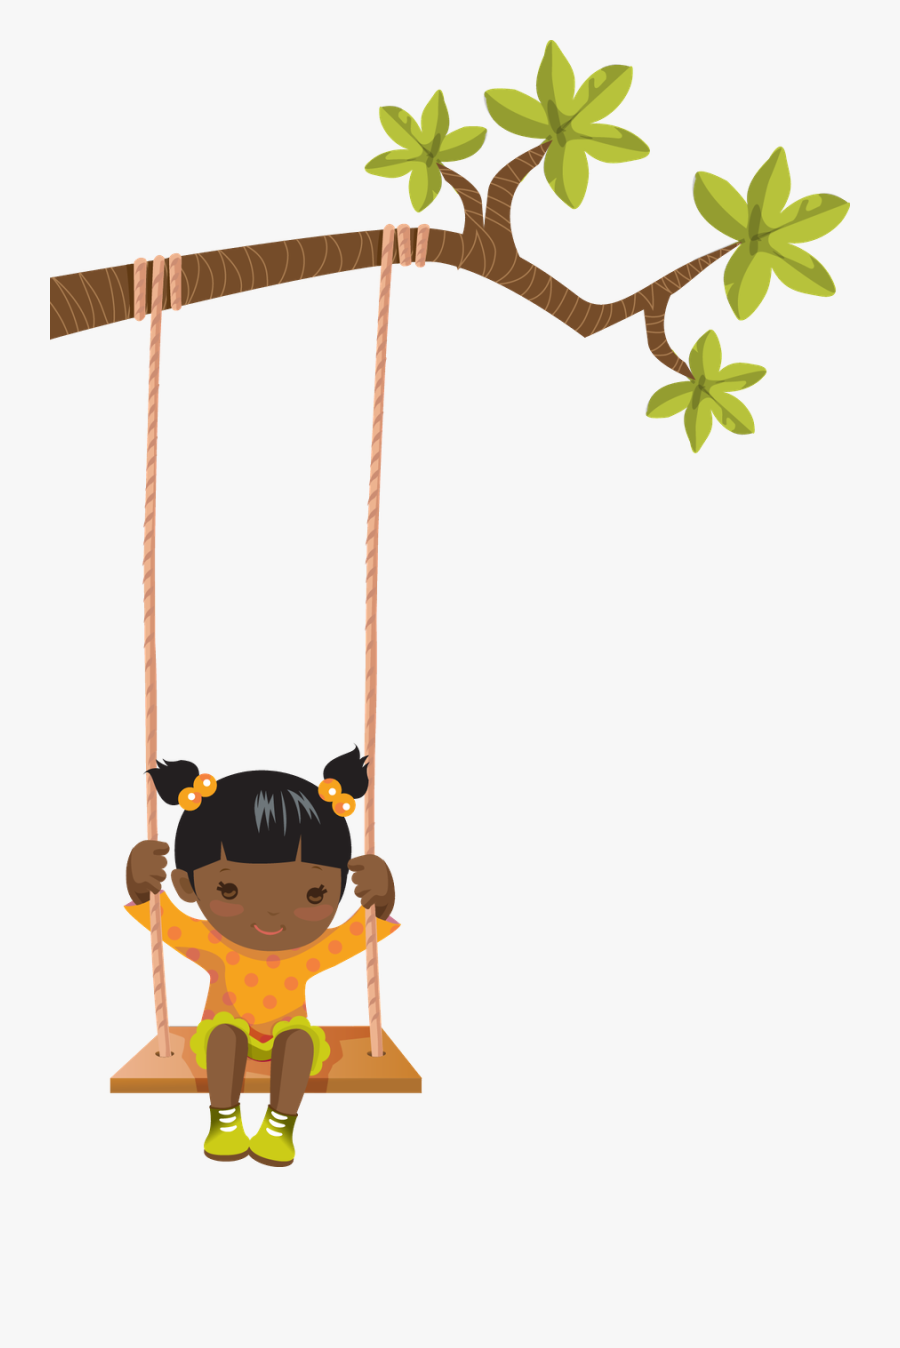 Child On Swing Clipart, Transparent Clipart